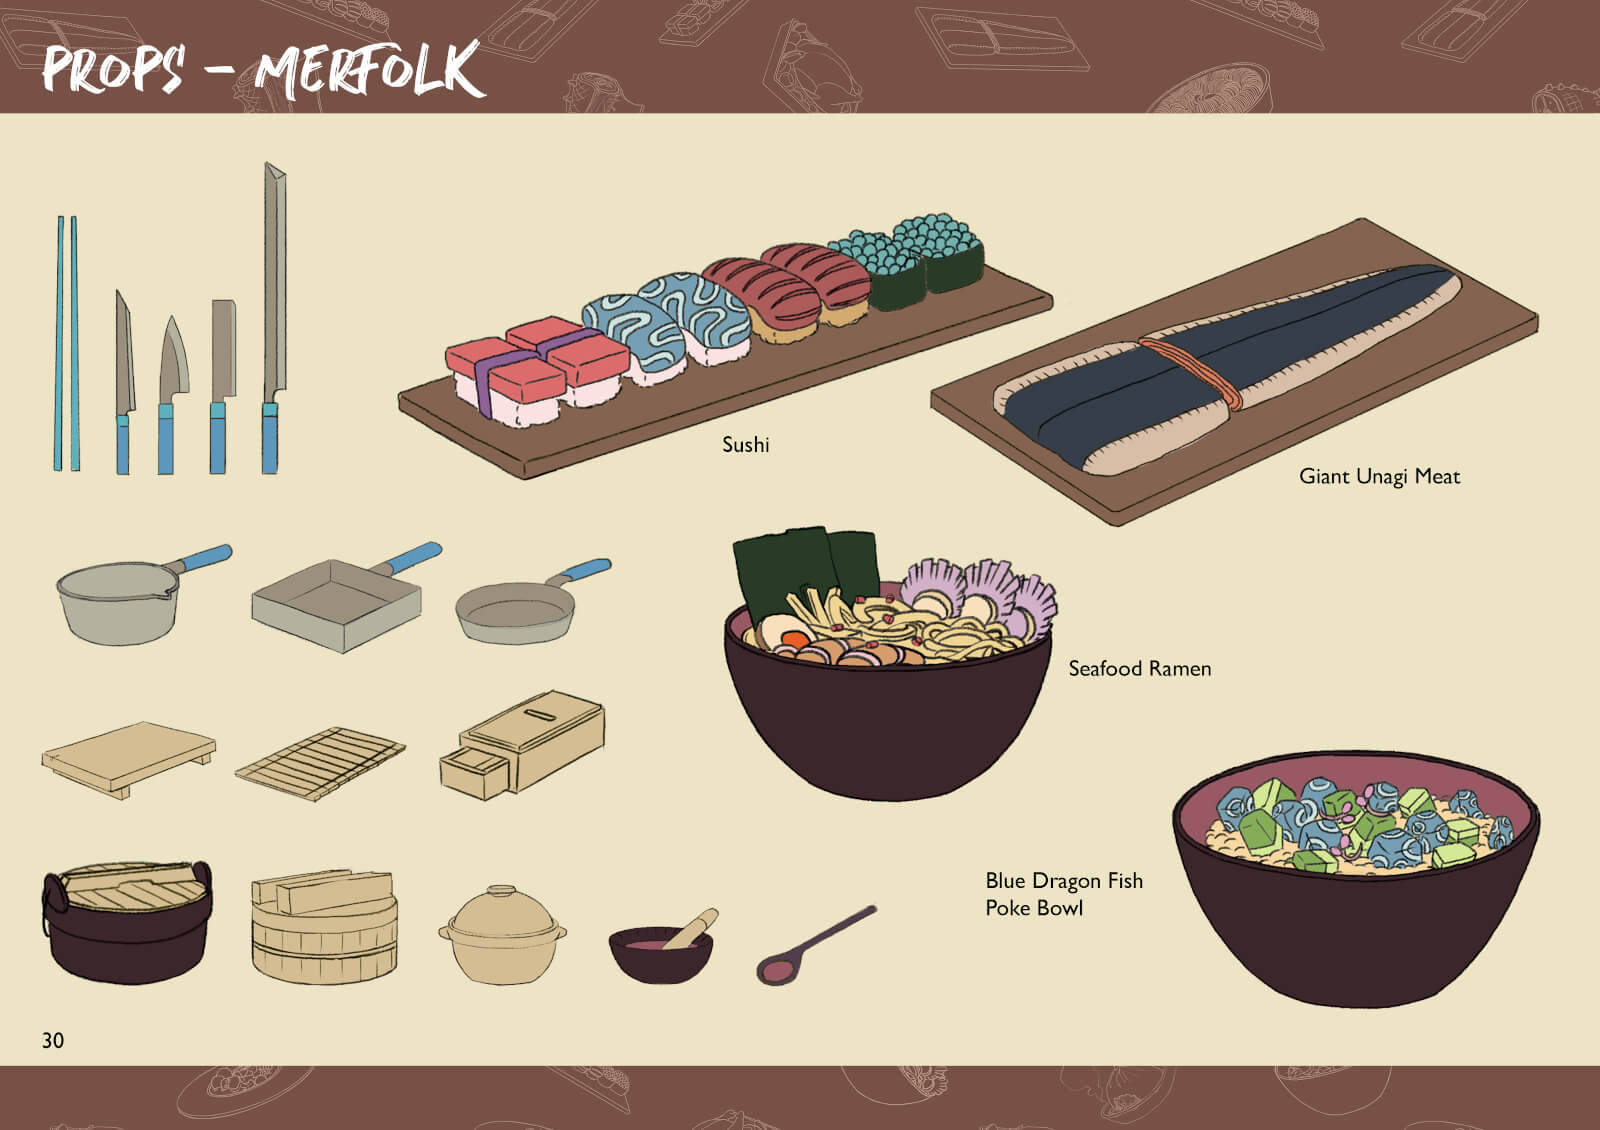 Food and cooking prop drawings